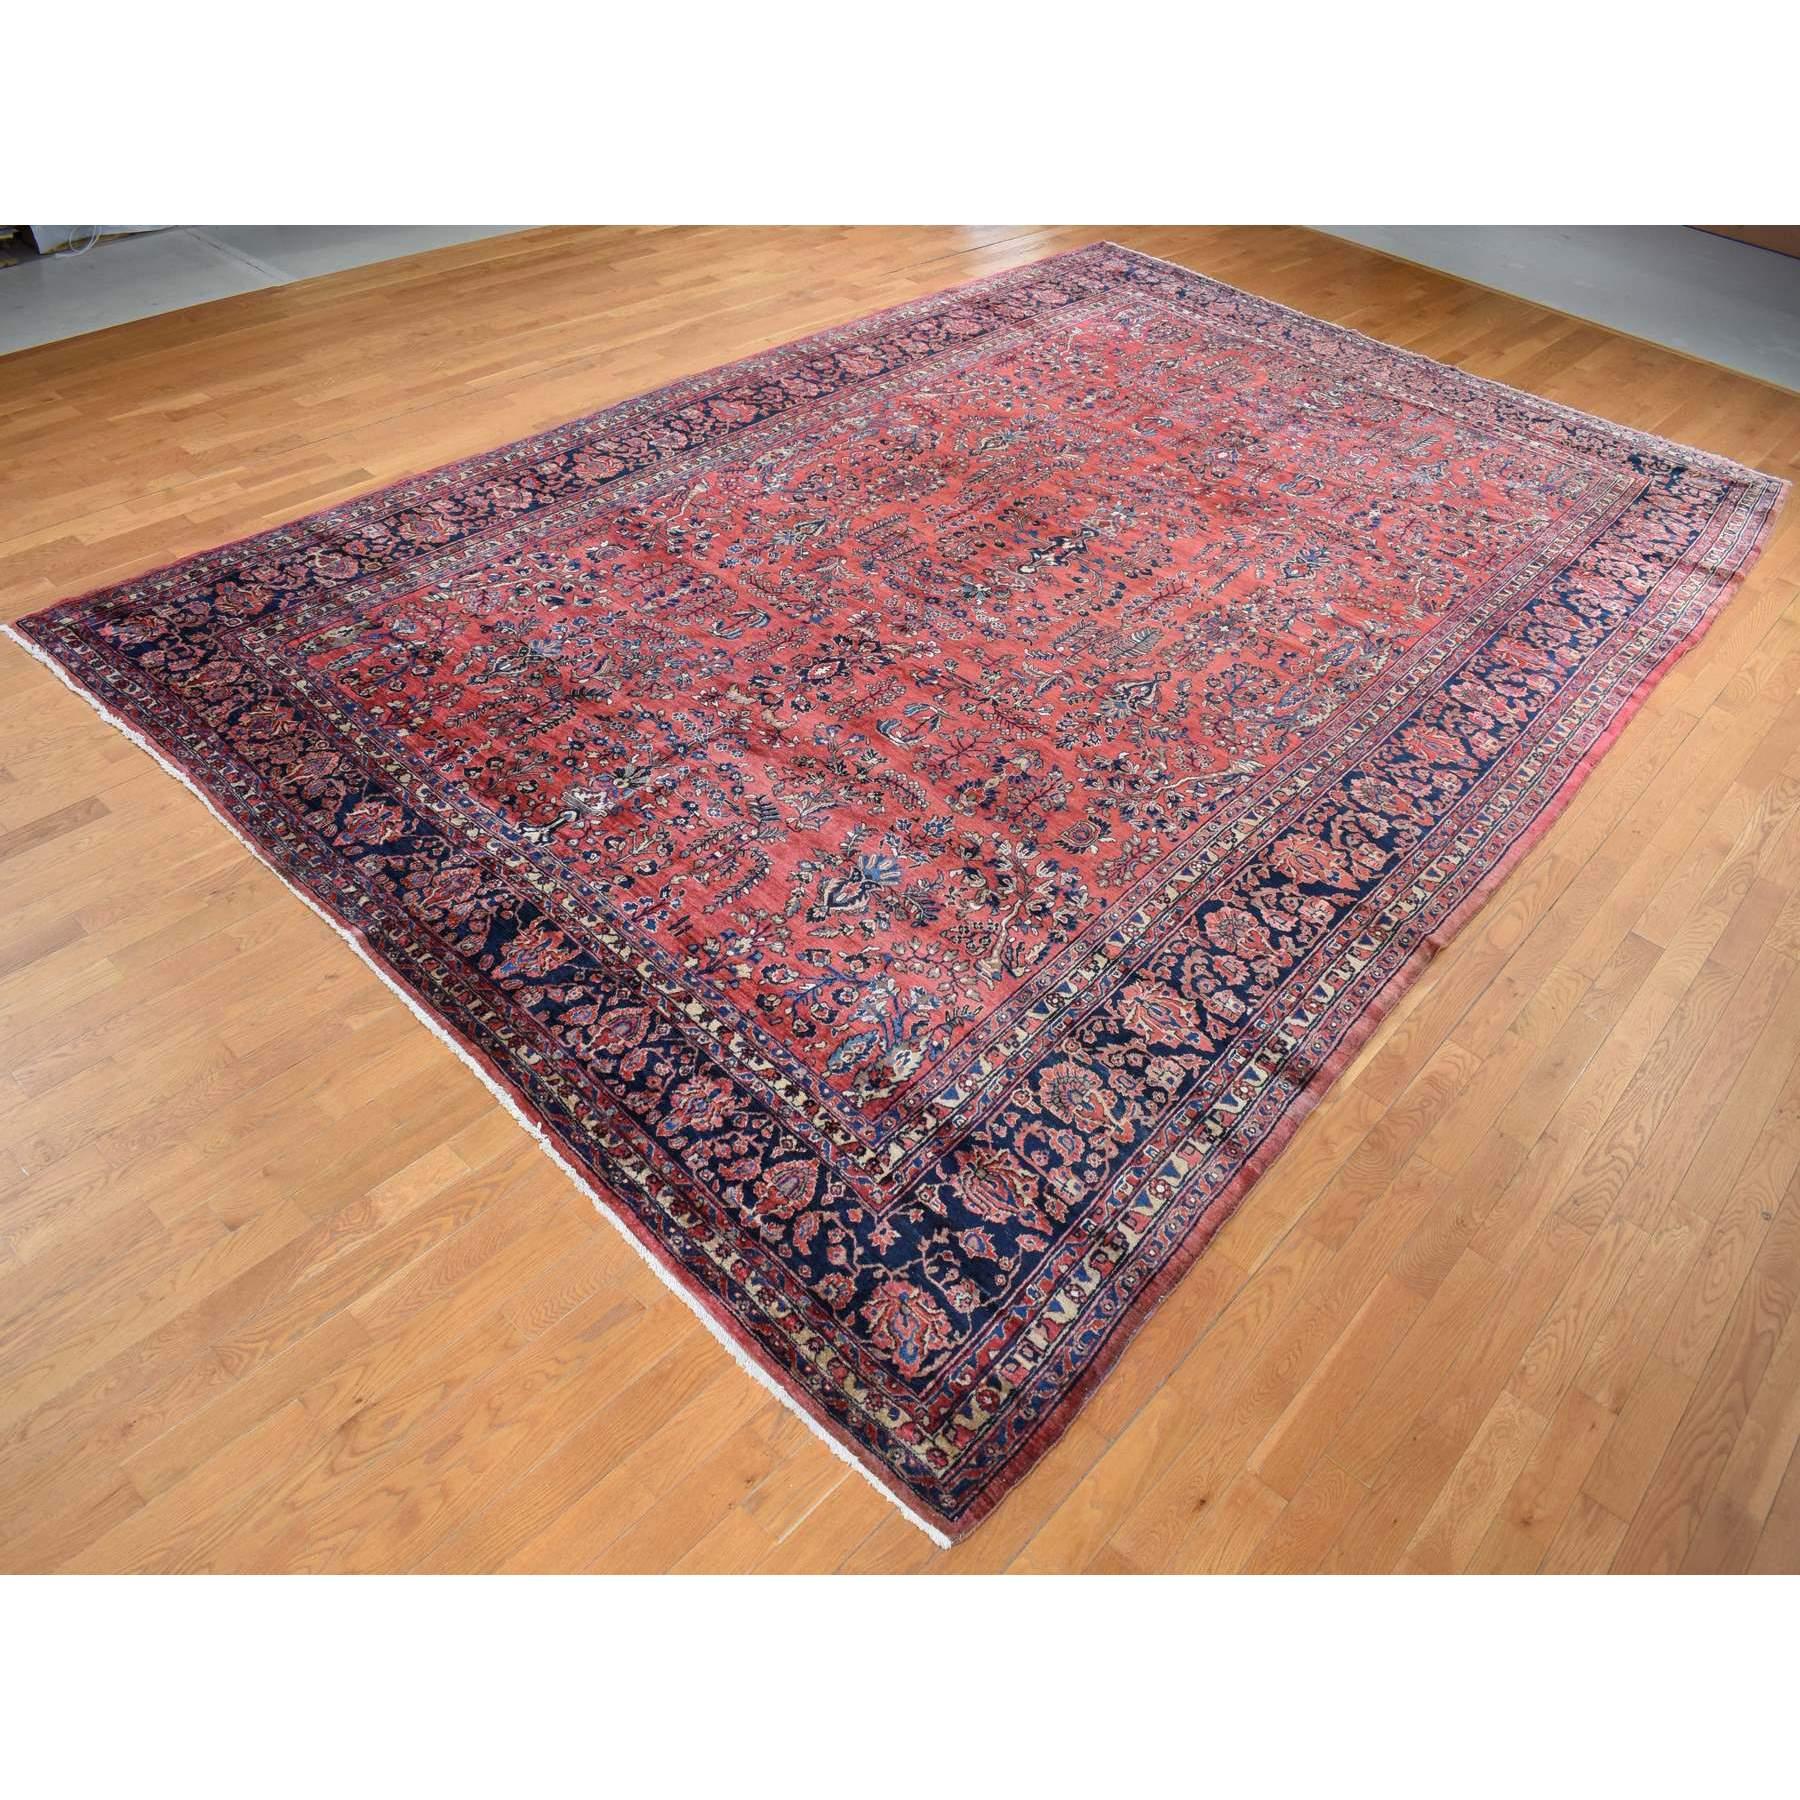 Medieval Red Antique Persian Sarouk Clean Even Wear Pure Wool Hand Knotted Oversized Rug For Sale